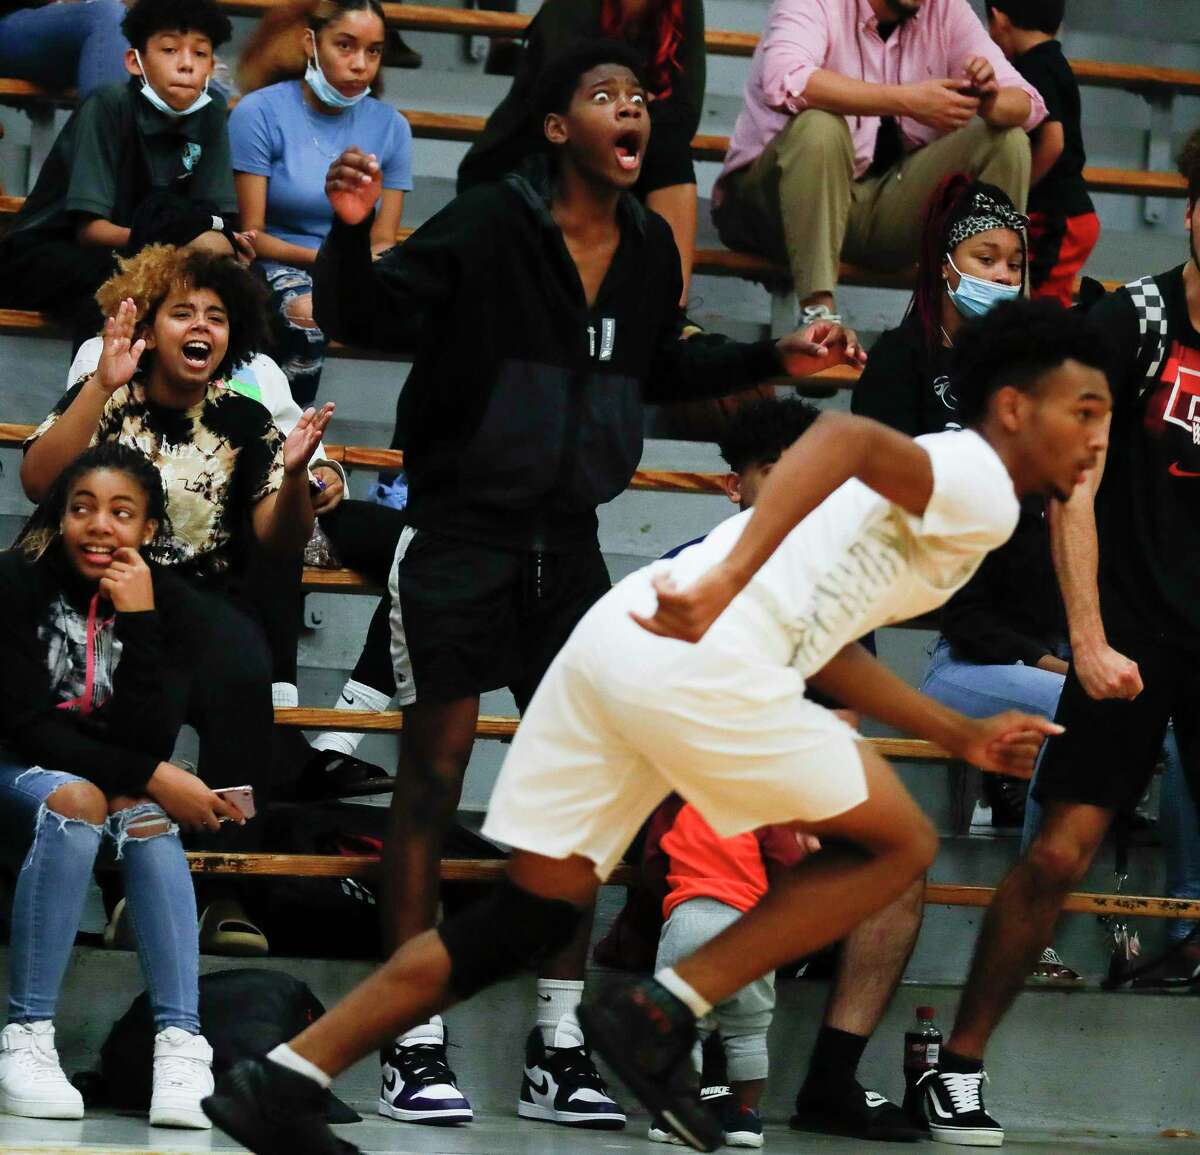 Conroe fans react after a three-pointer by point guard Niglel Leday during the first quarter of a non-district high school basketball game at Conroe High School, Friday, Dec. 3, 2021, in Conroe.